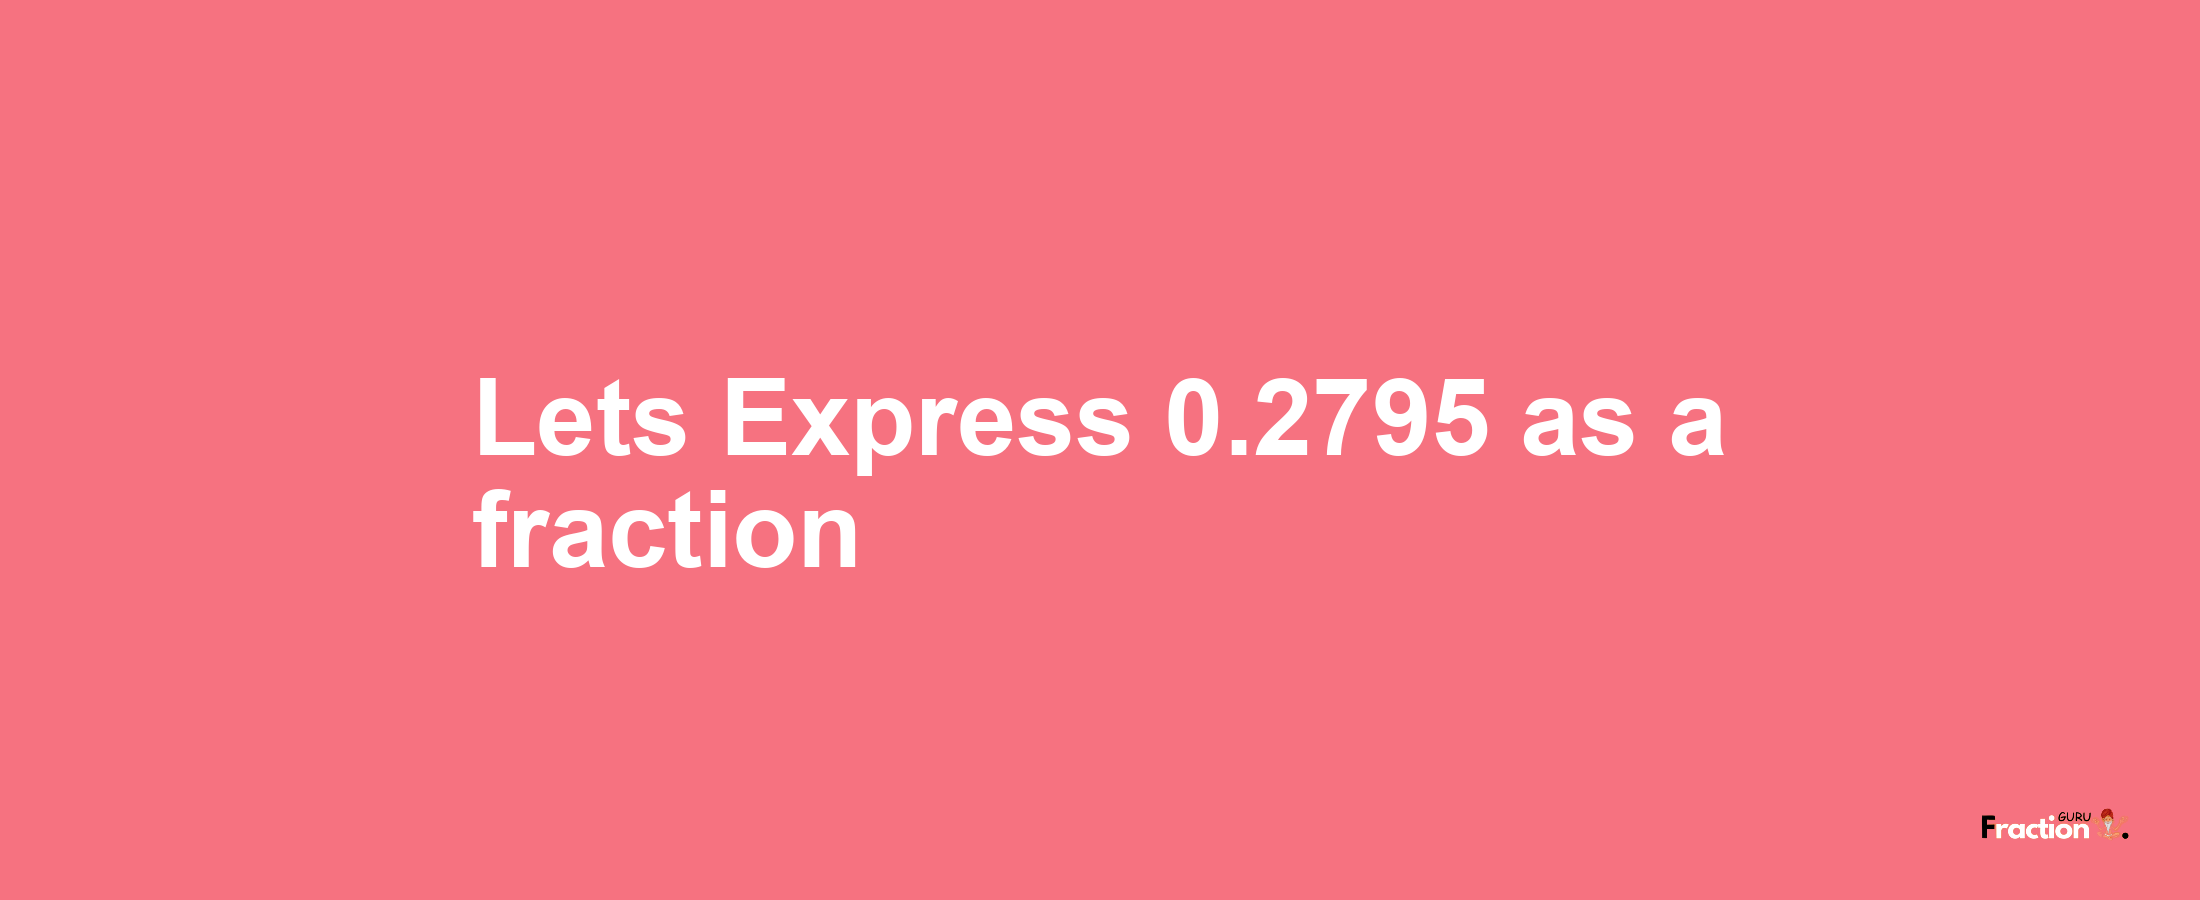 Lets Express 0.2795 as afraction